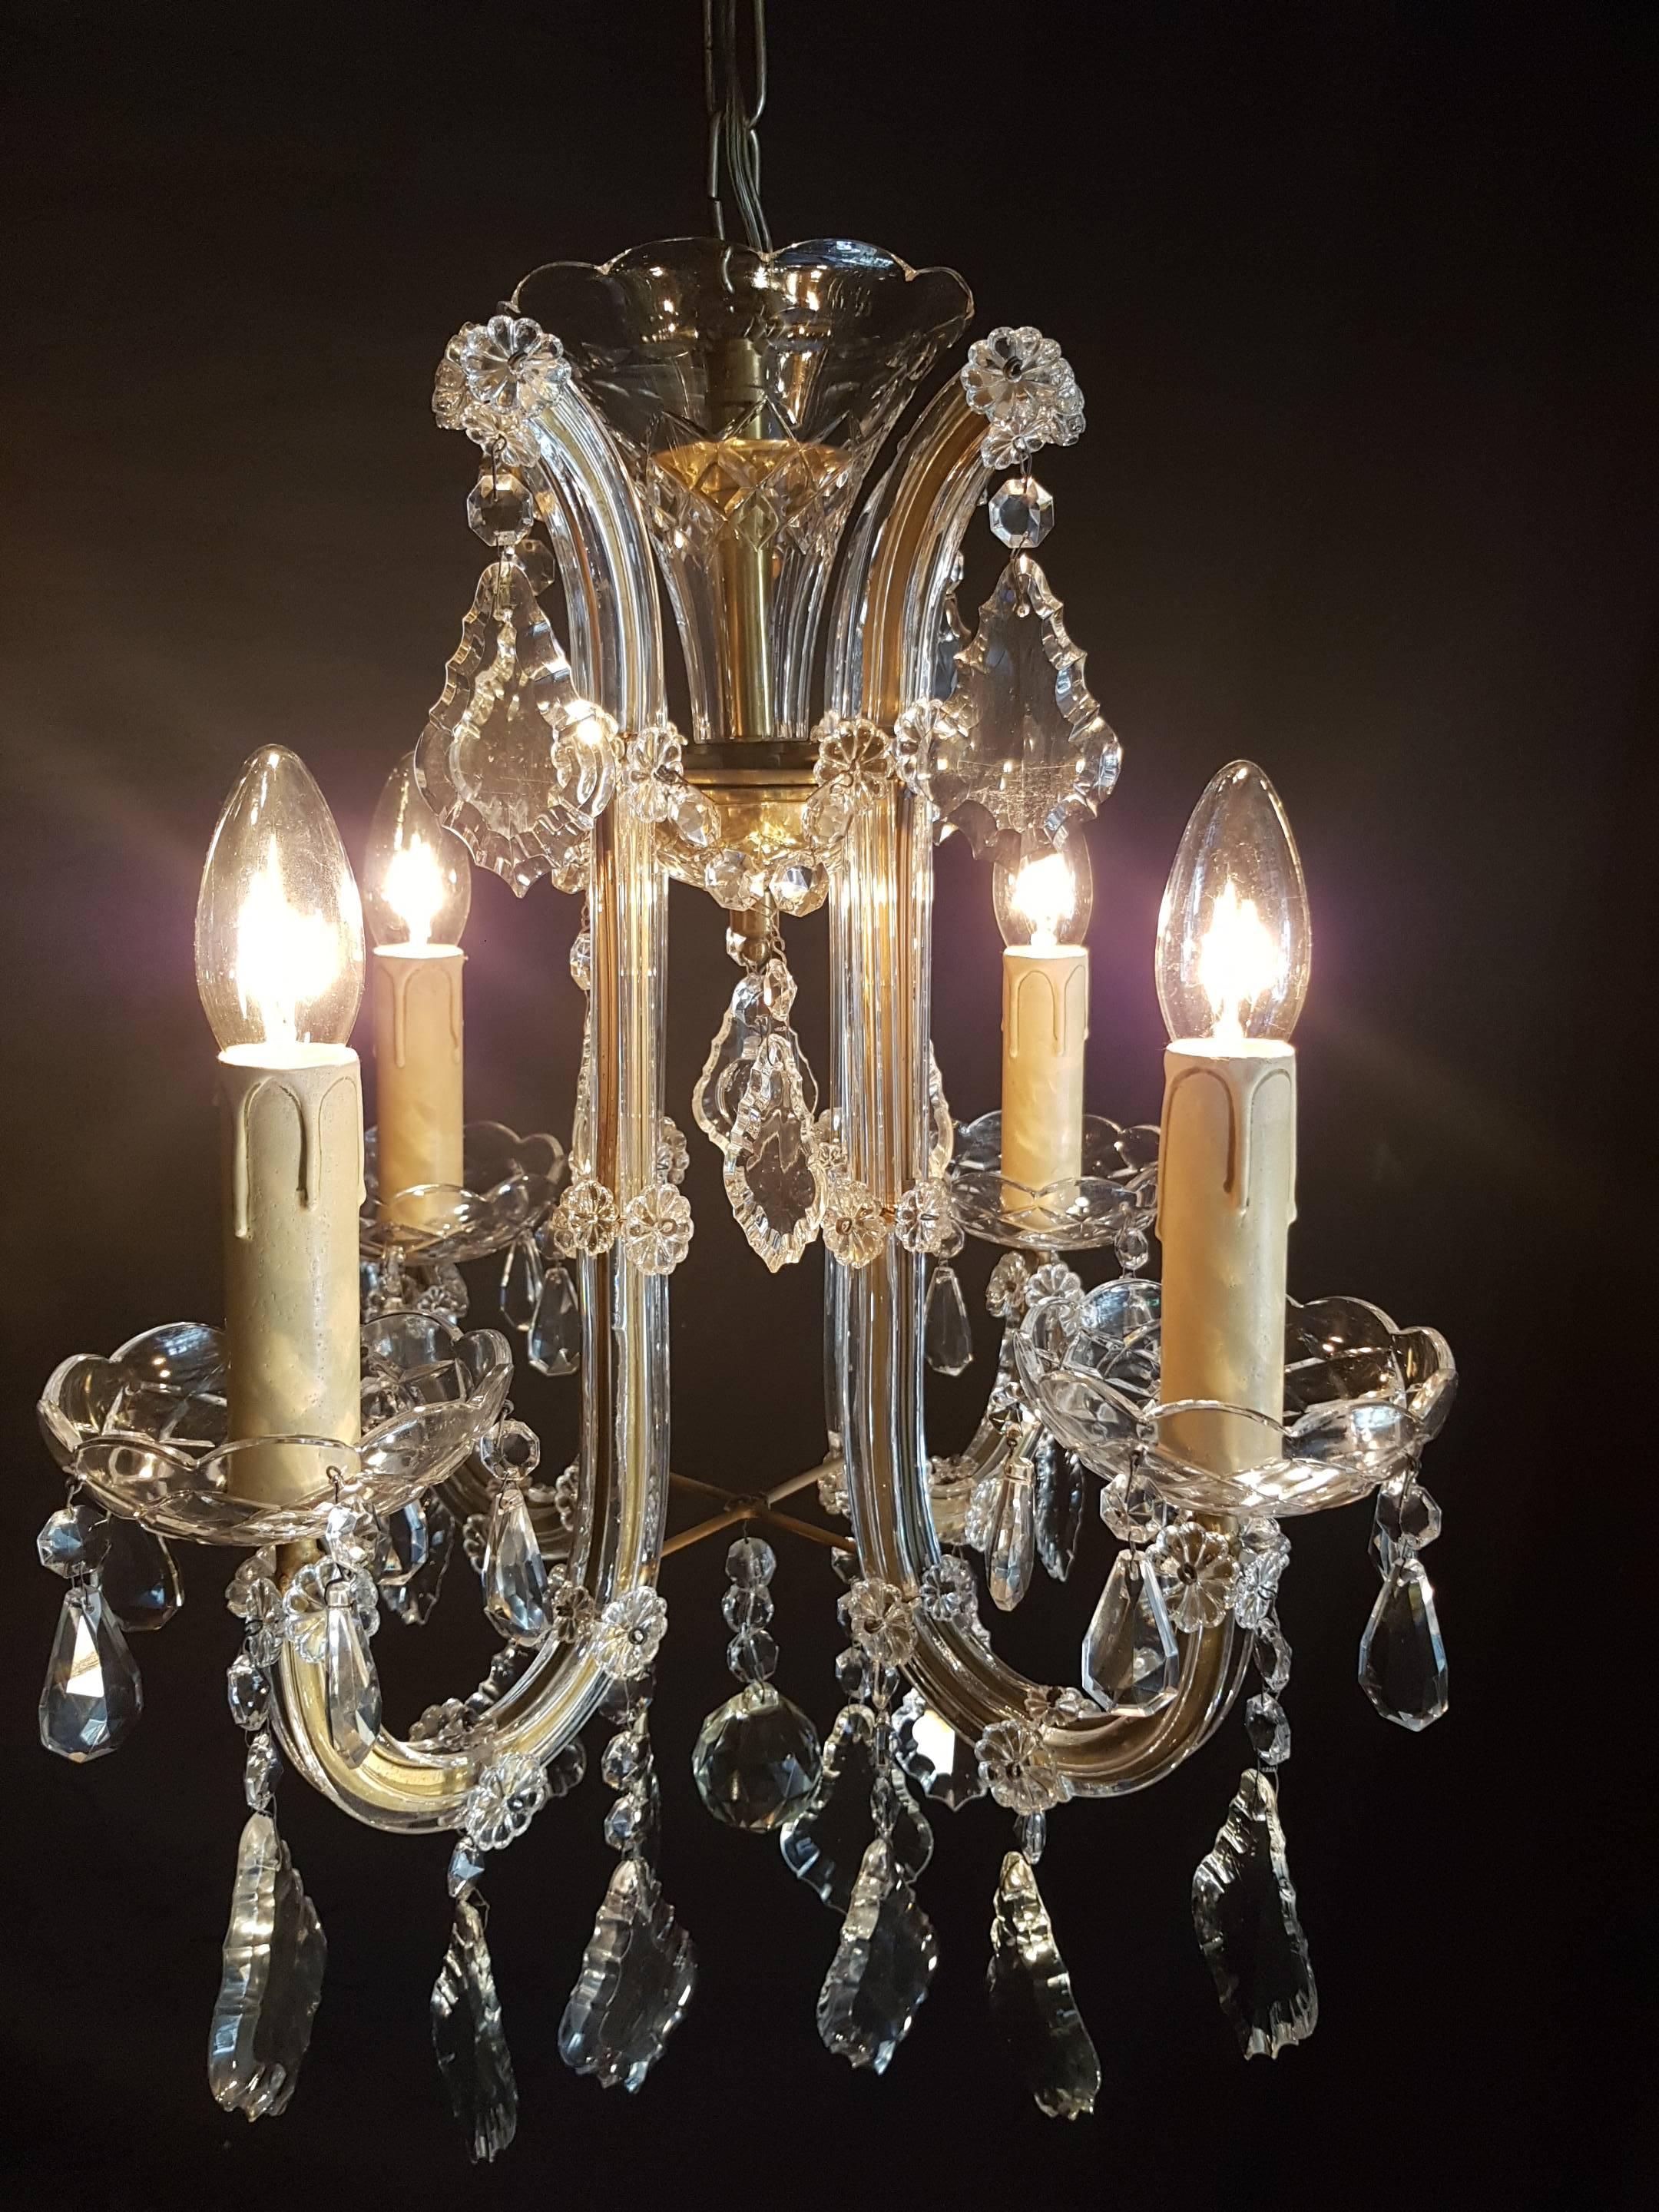 Very nice four-light Maria Theresia chandelier with crystal and glass.
This is just one of our large collection chandeliers. Besides the old and antique chandeliers we have a beautiful series of new large chandeliers in the Maria Theresia style.
 